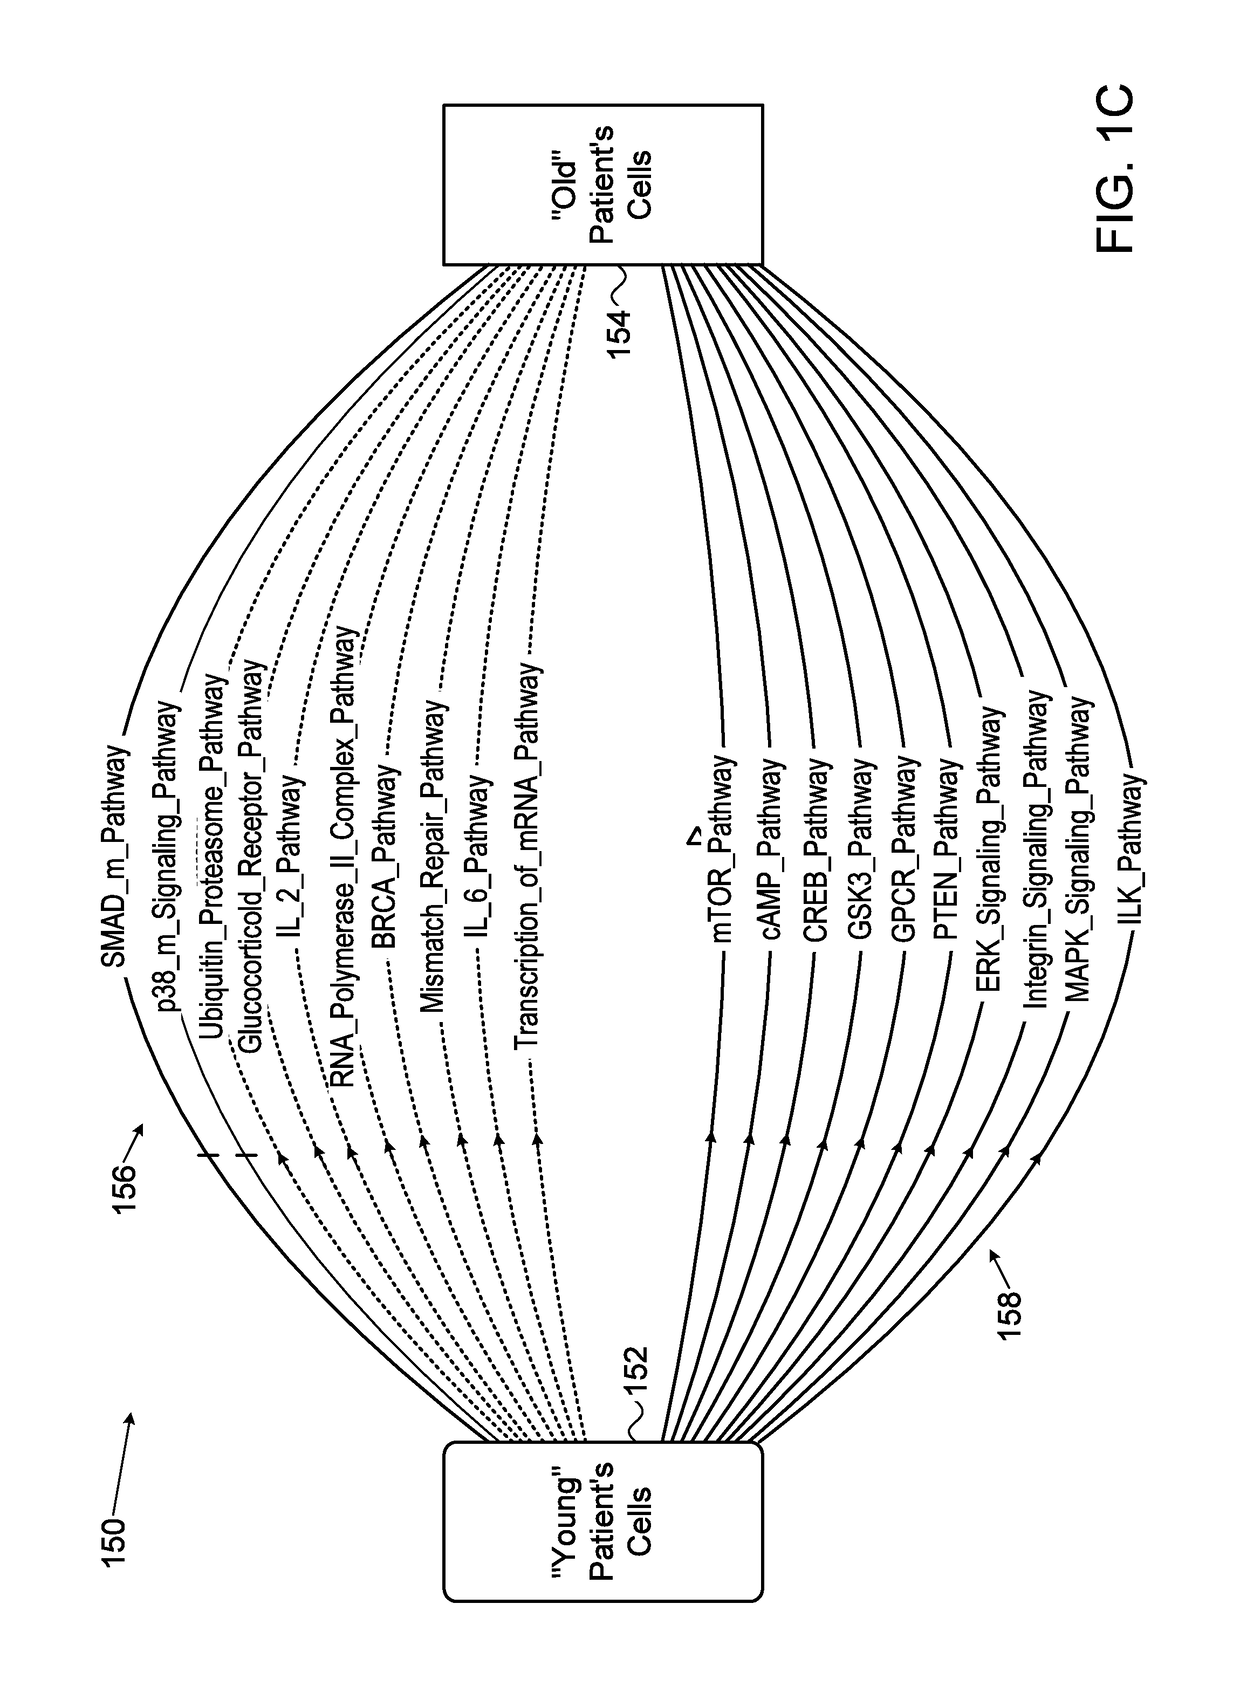 Systems, methods and software for ranking potential geroprotective drugs